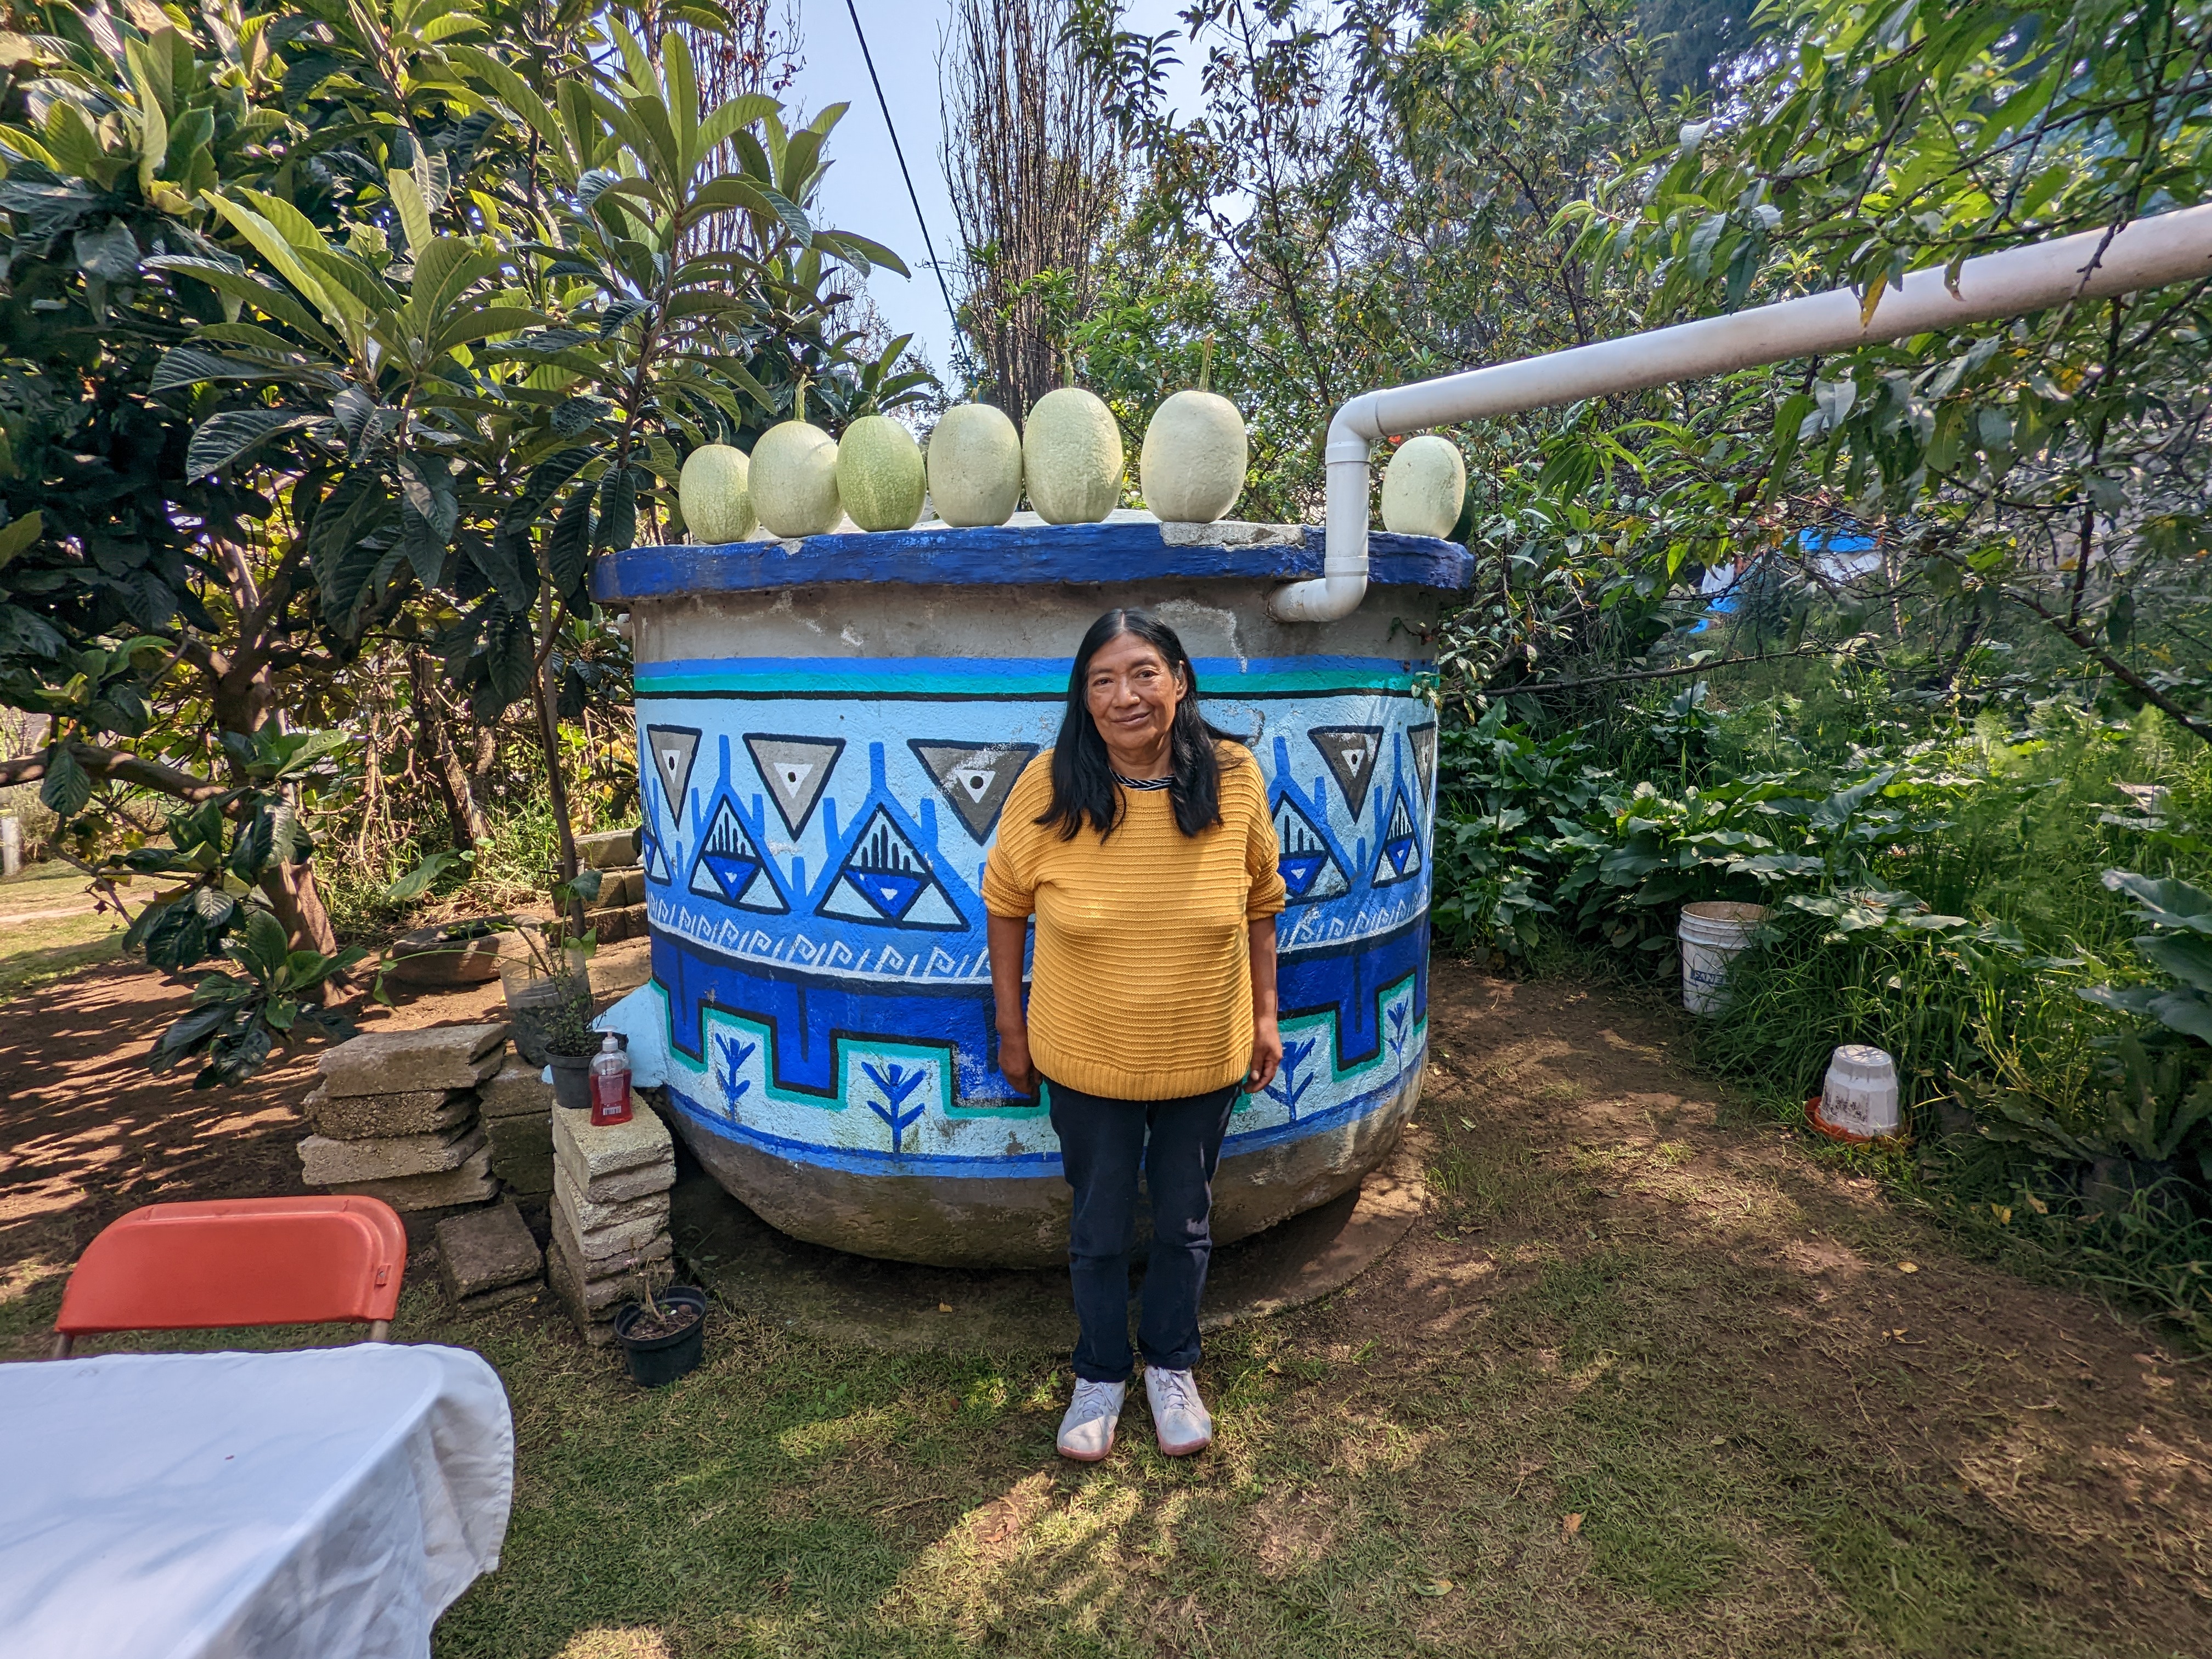 Elena, owner of an Isla Urbana rainwater catchment system, poses next to her rainwater tank, which holds enough water to fulfill her family's needs for 8 months out of the year; Photo: Tracey Coe